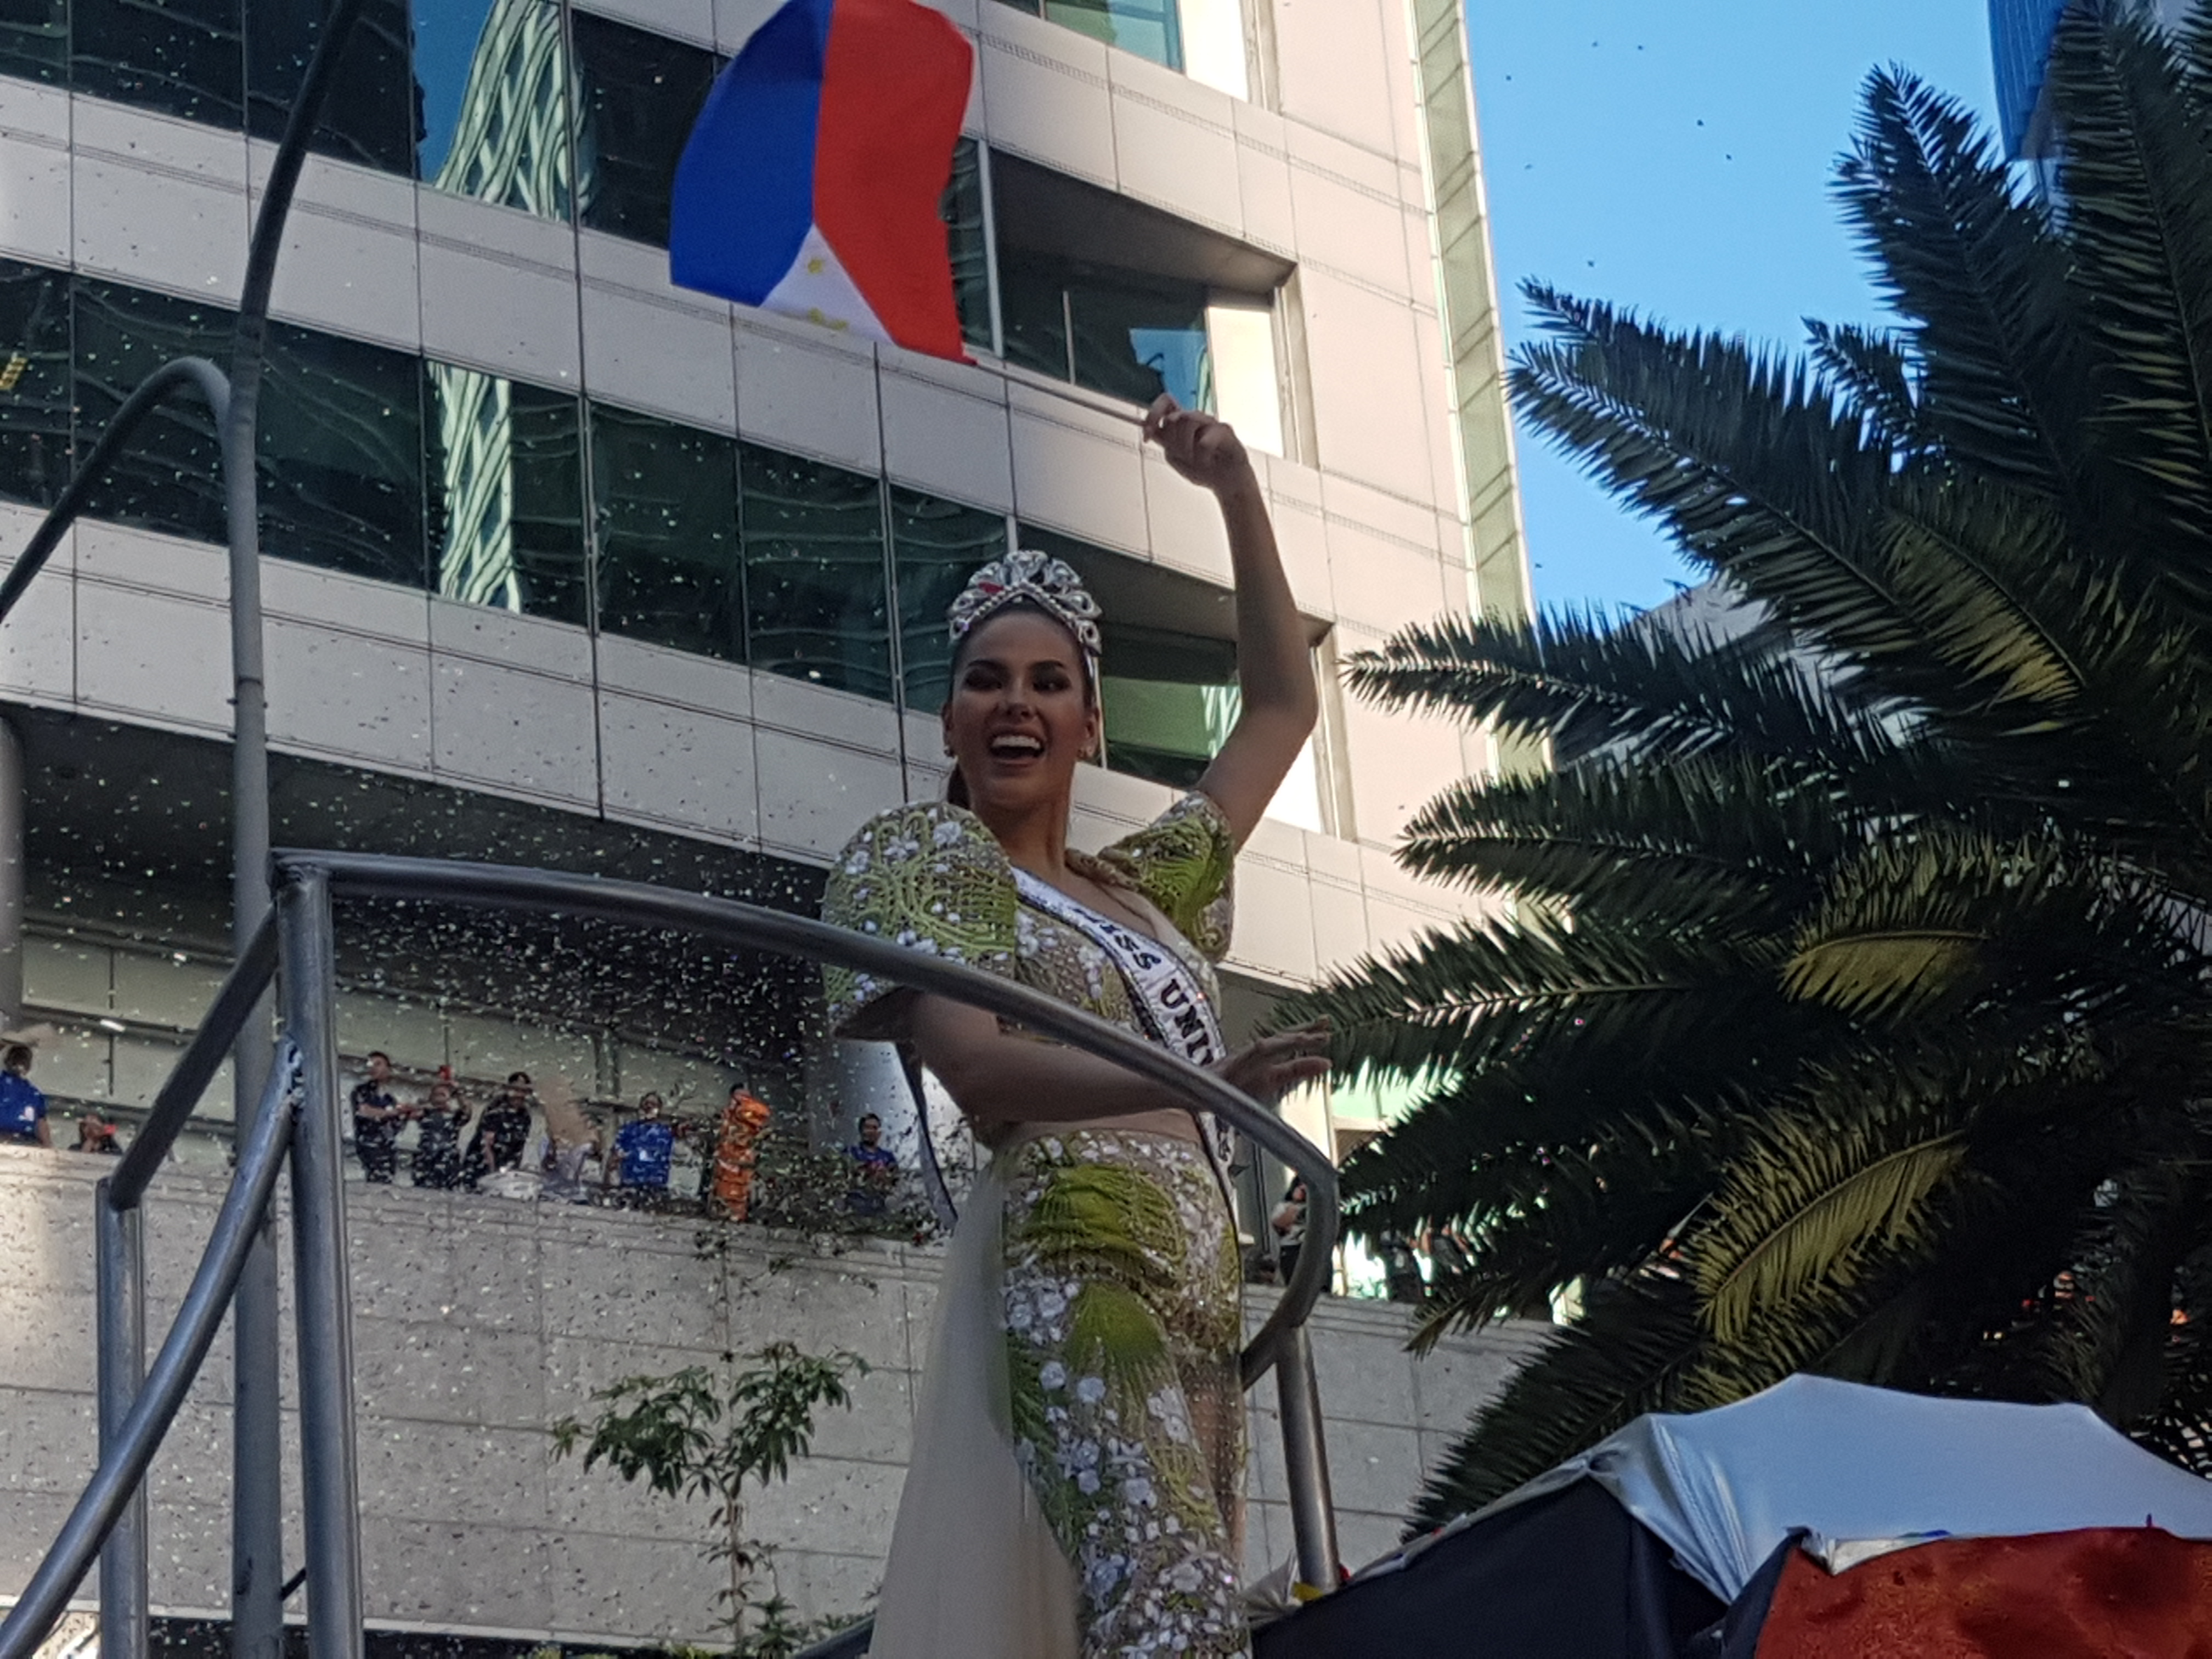 Miss Universe 2018 Catriona Gray’s homecoming parade: Fit for a queen